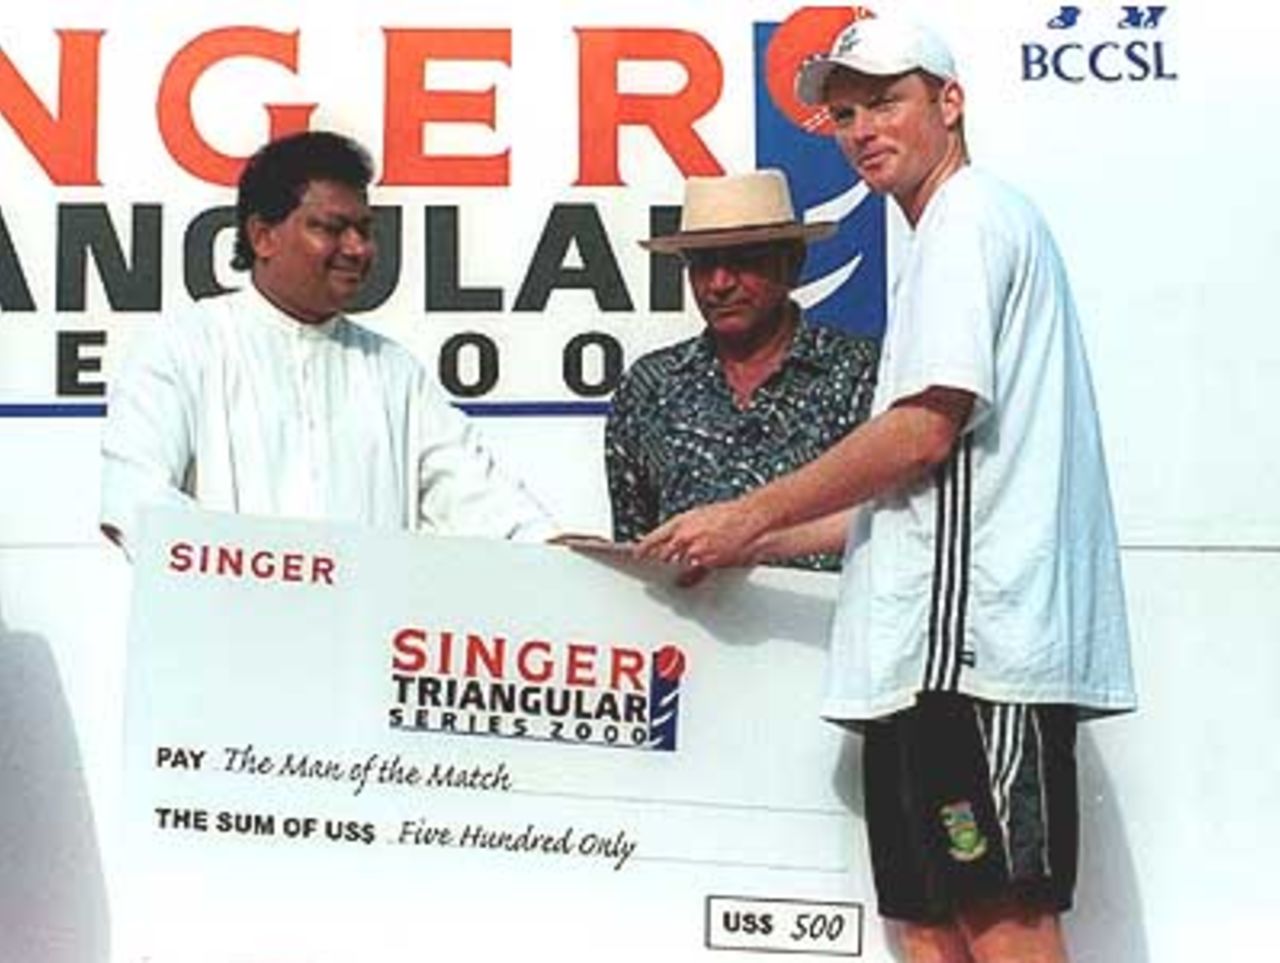 Terbrugge receives a well deserved Man of the Match award, Singer Triangular Series, 2000/01, 6th Match, Pakistan v South Africa, Sinhalese Sports Club Ground, Colombo, 12 July 2000.